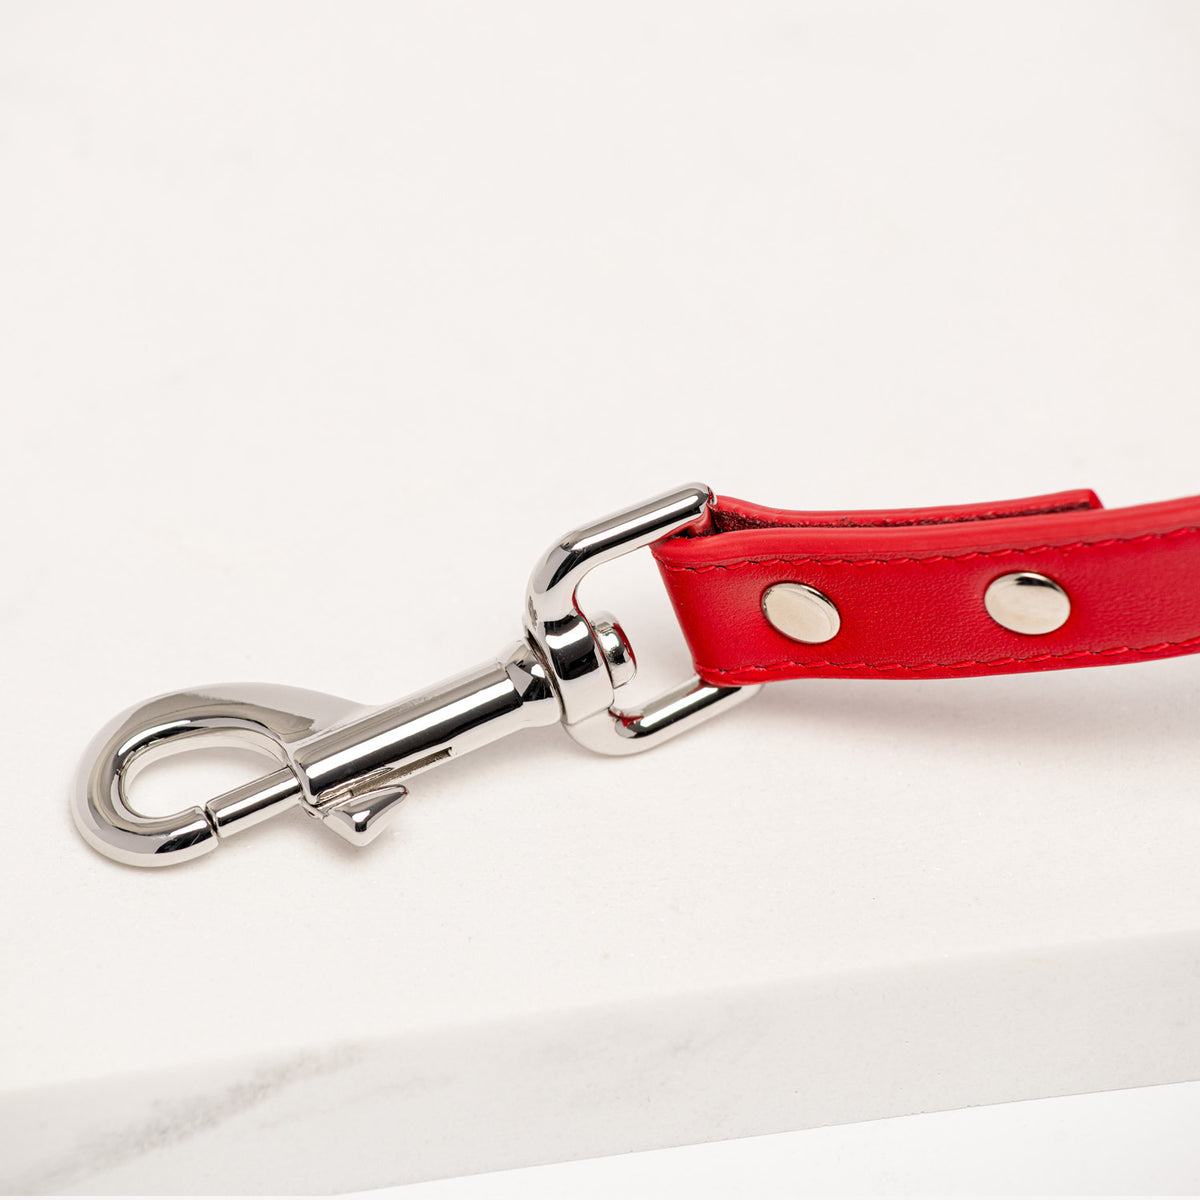 Rufus & Coco's Paris red leather dog lead is made from quality leather. Each lead is finished with premium silver hardware and studs for style and durability. Suitable for dogs of all sizes, this 100% red leather dog lead is 120cm long.